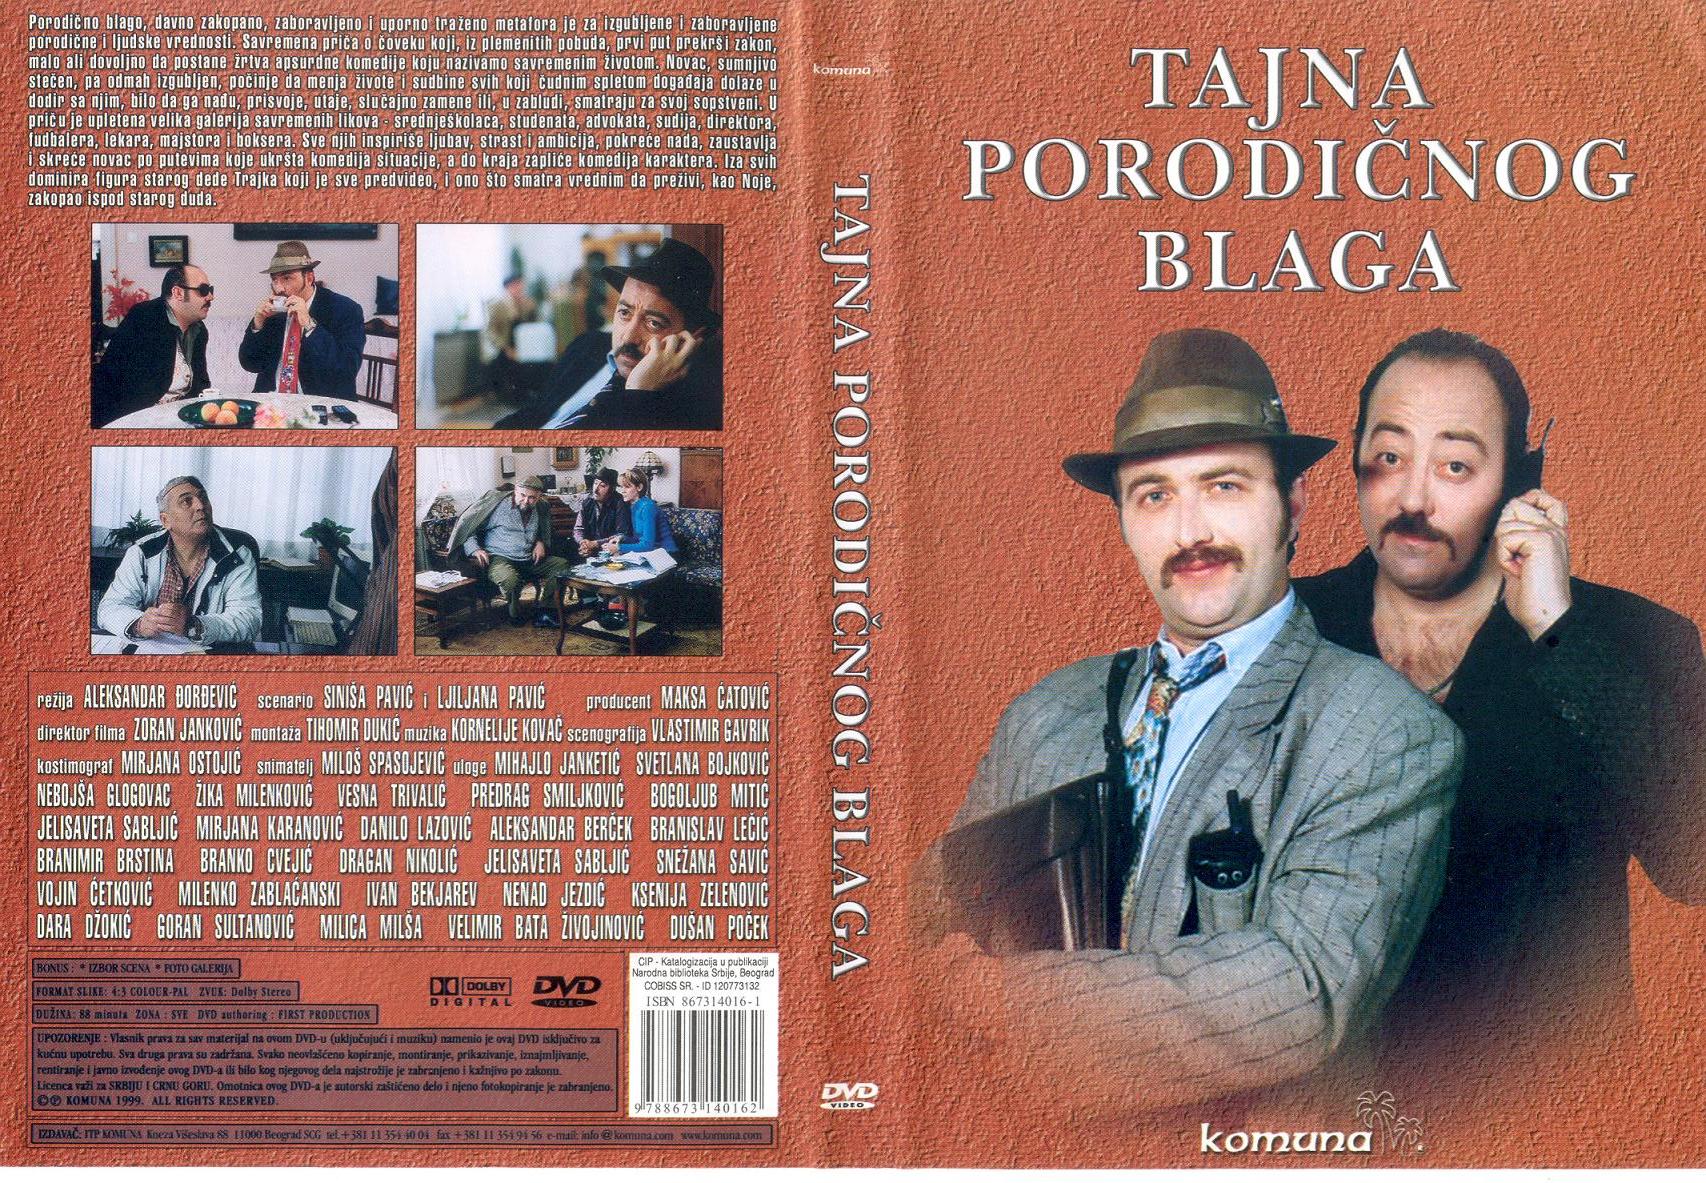 Click to view full size image -  DVD Cover - T - DVD - TAJNA PORODICNOG BLAGA - DVD - TAJNA PORODICNOG BLAGA.jpg